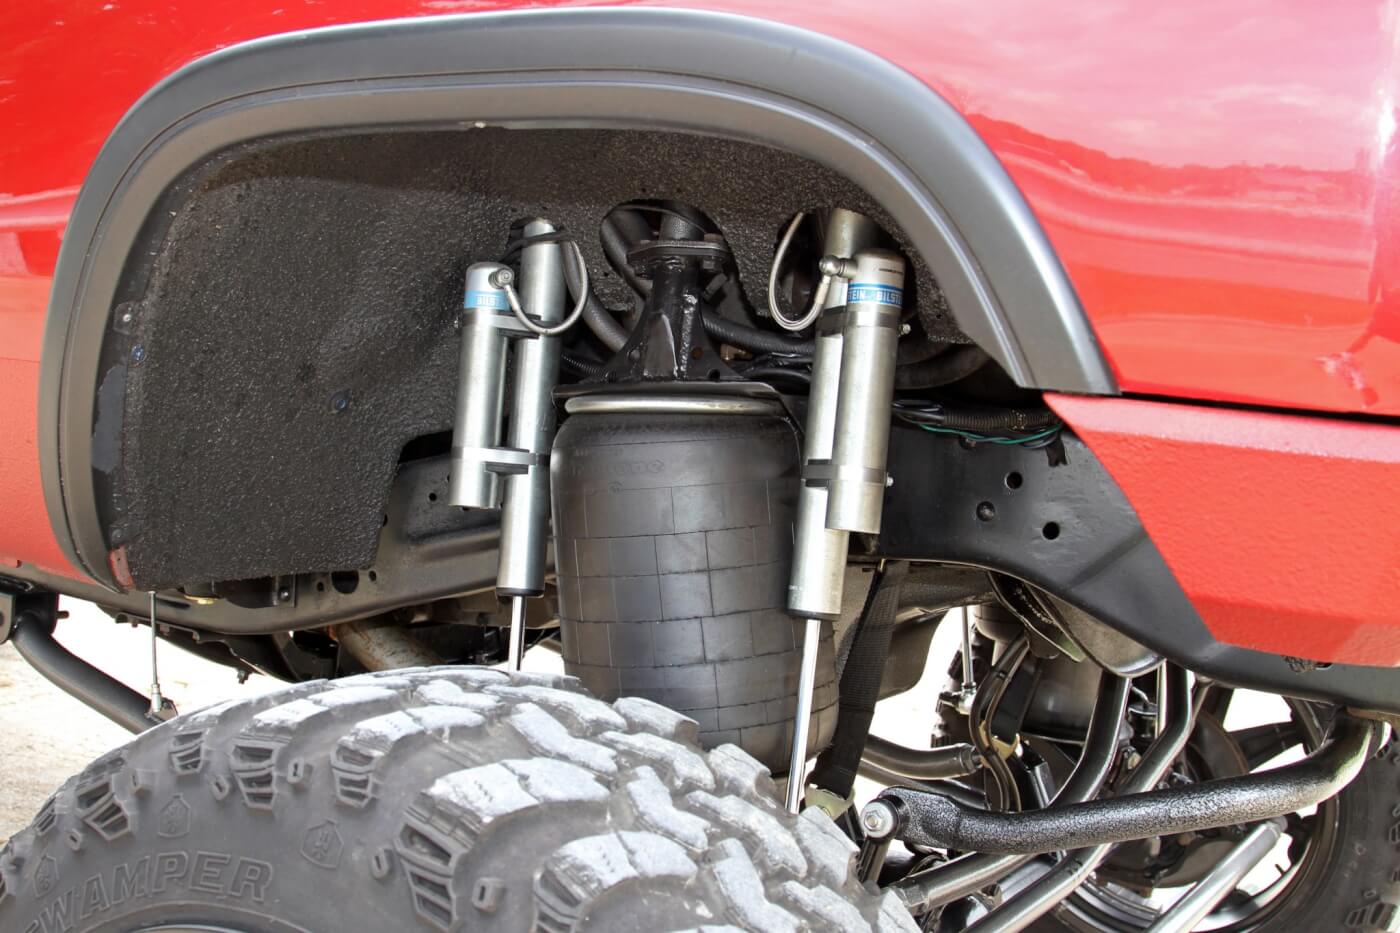 Each front corner of the truck is treated to a pair of Bilstein shocks on custom mounts flanking the Firestone airbag. Notice the upper support that ties the bag mounts together side to side over the engine.